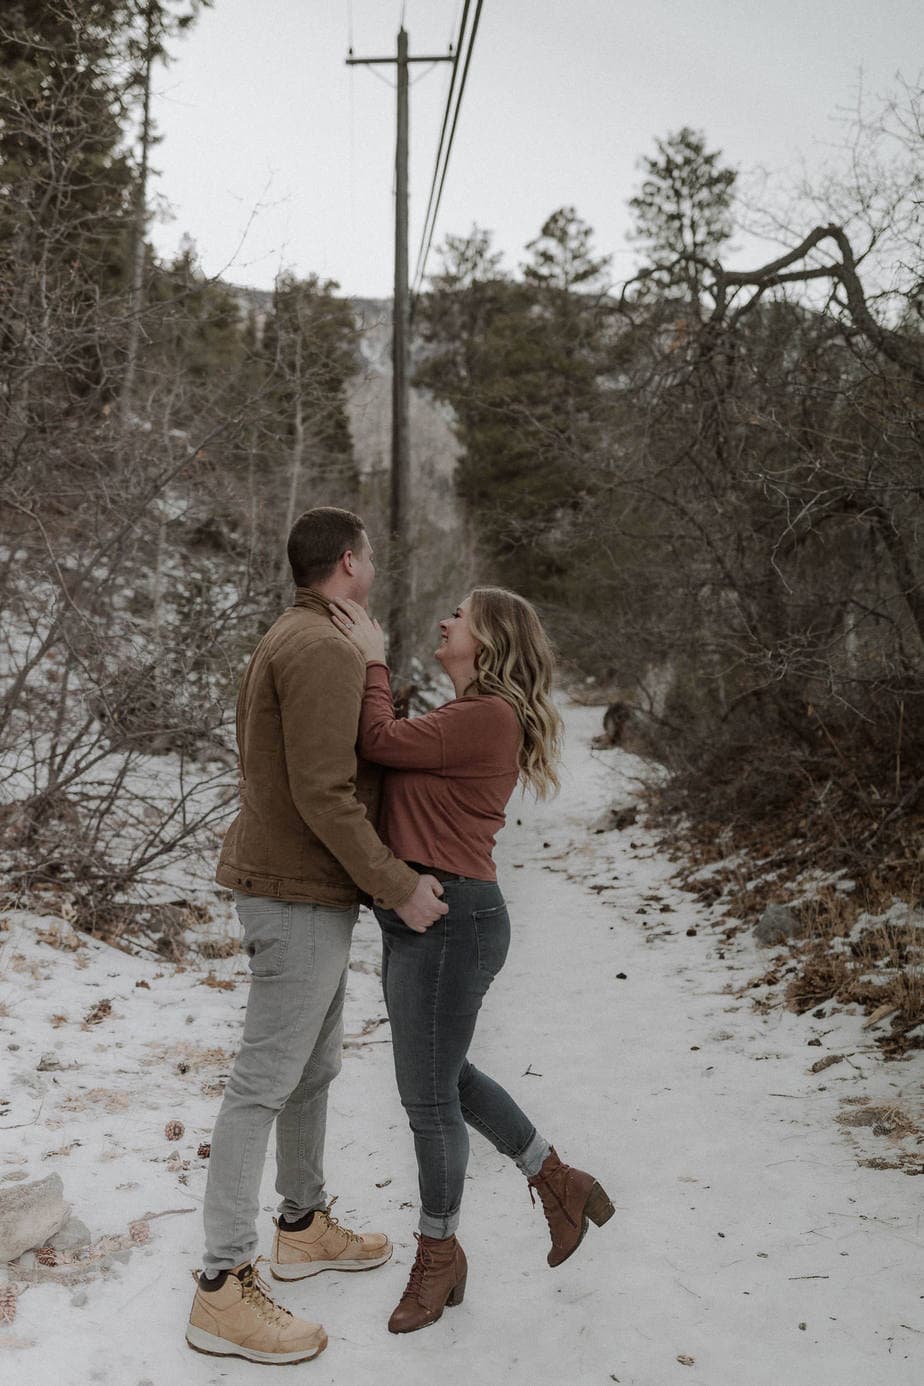 A winter Oregon engagement session with snow. Couple plays around and tickles each other. Jewel tone shirts make the winter scene feel happy